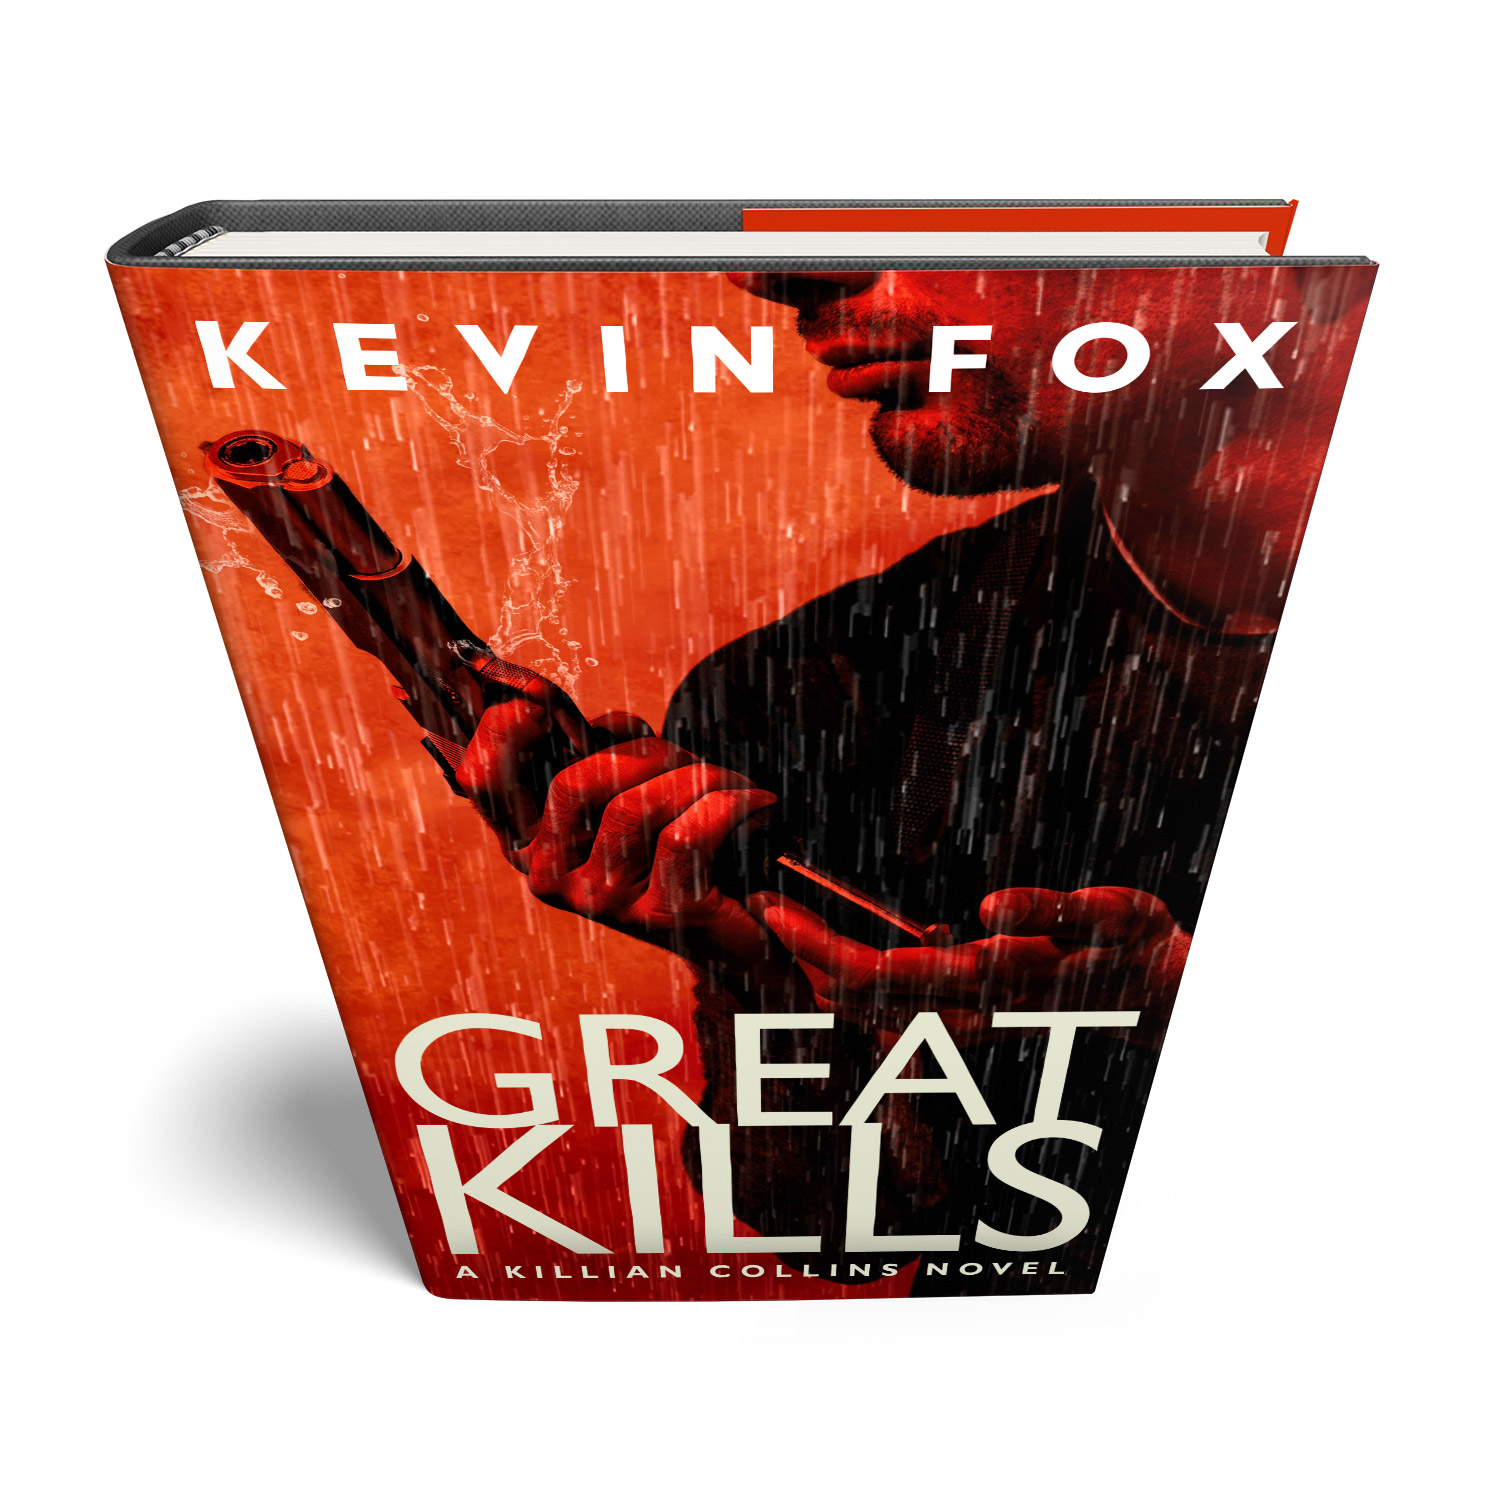 'Great Kills' is a great, gritty, character-led thriller. The author is Kevin Fox. The book cover design and interior formatting are by Mark Thomas. To learn more about what Mark could do for your book, please visit coverness.com.